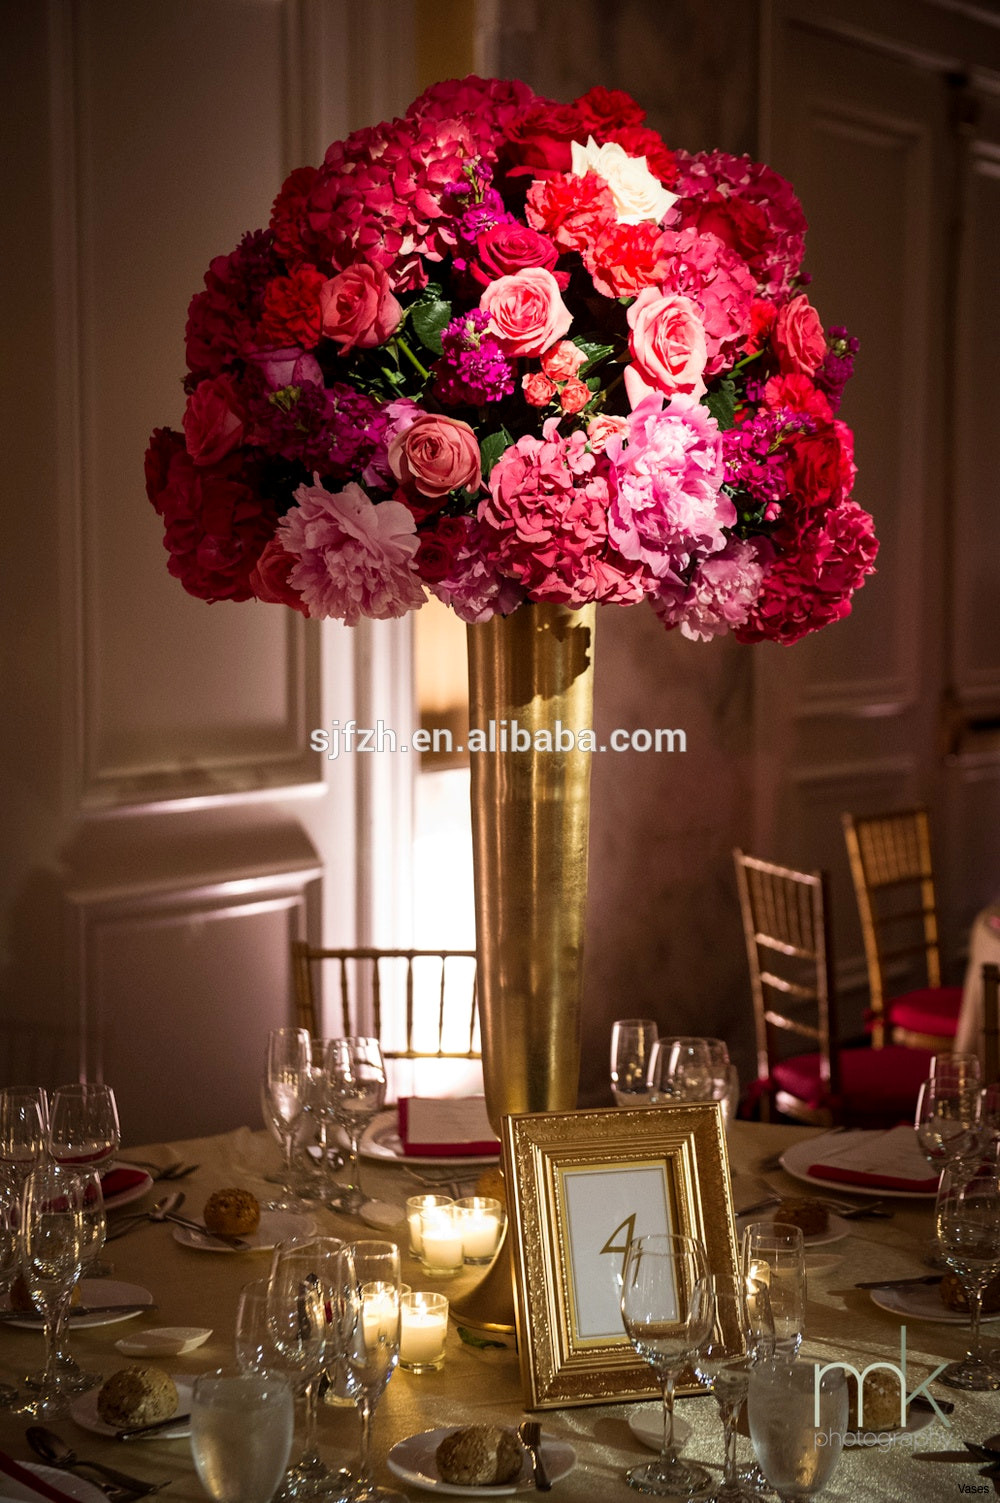 29 Lovely Glass Vases for Wedding Table Decorations 2022 free download glass vases for wedding table decorations of gold wedding decorations fresh dsc7285h vases gold pedestal vase for gold wedding decorations best of decoration excellent picture accessories fo